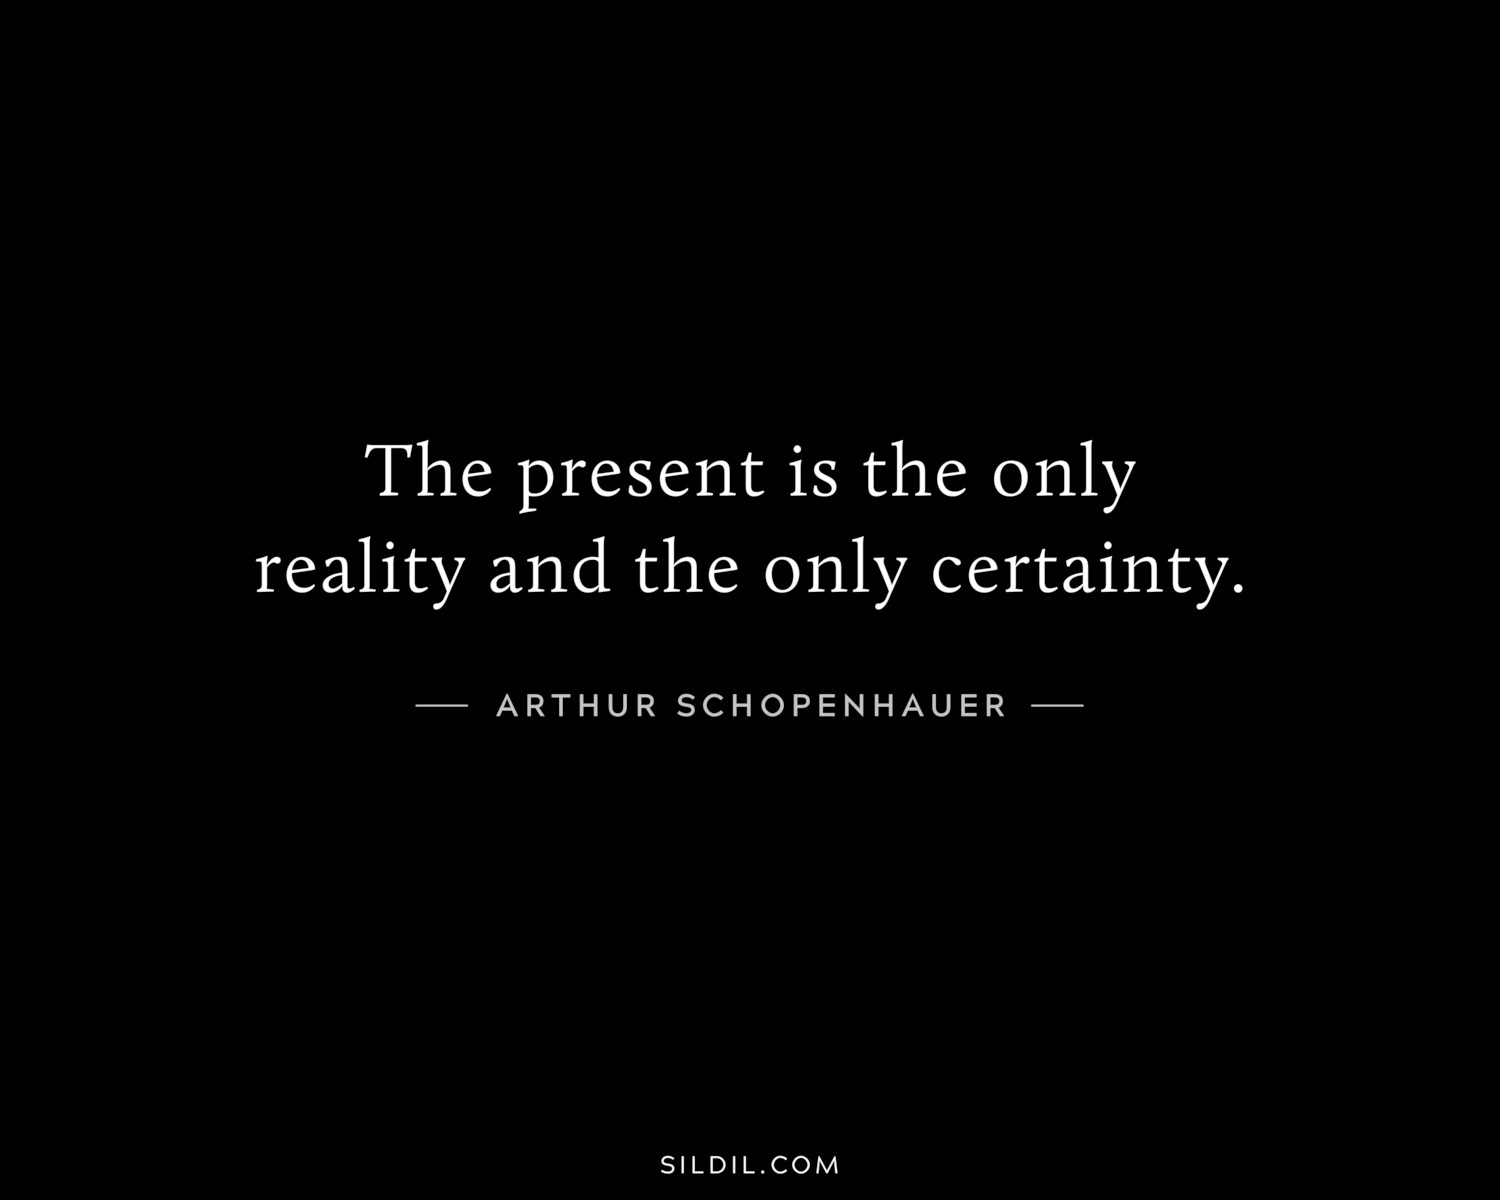 The present is the only reality and the only certainty.